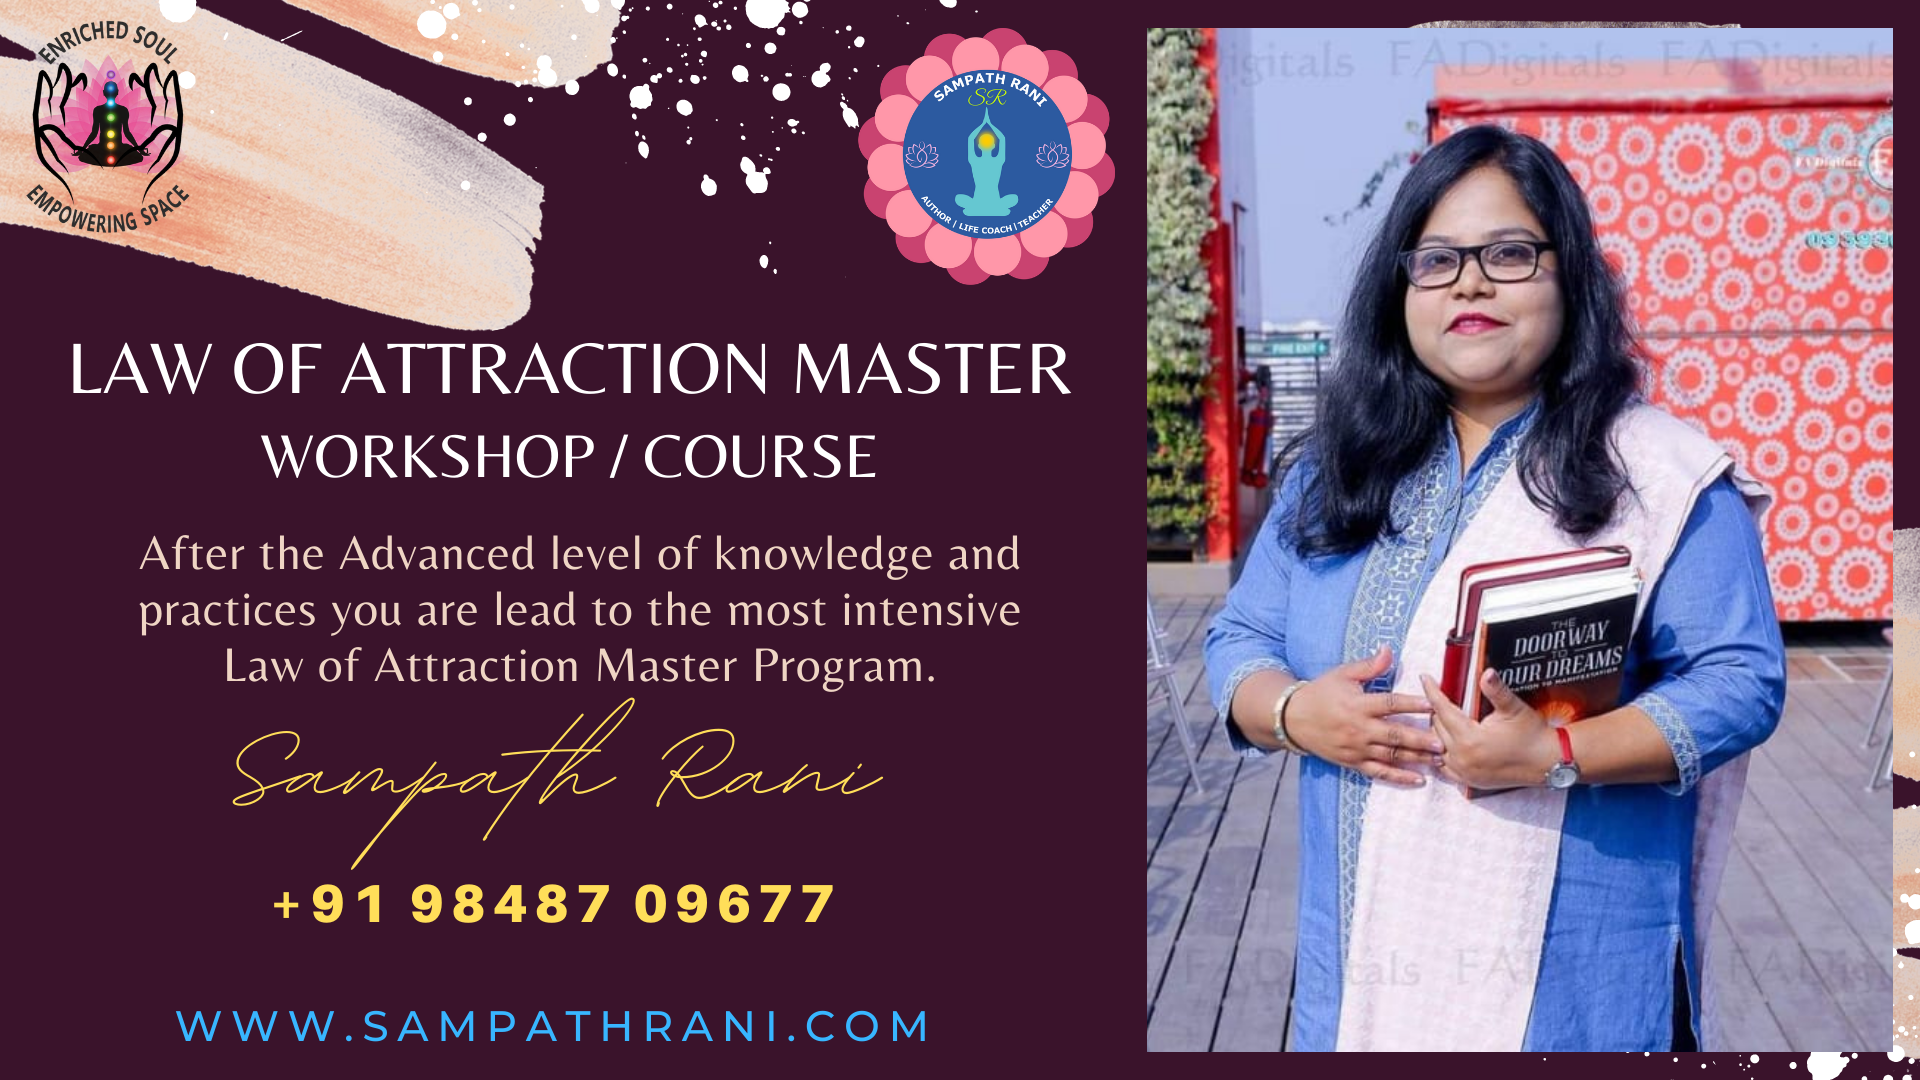 Law of Attraction Master Workshop, Course - by Sampath Rani - Washington